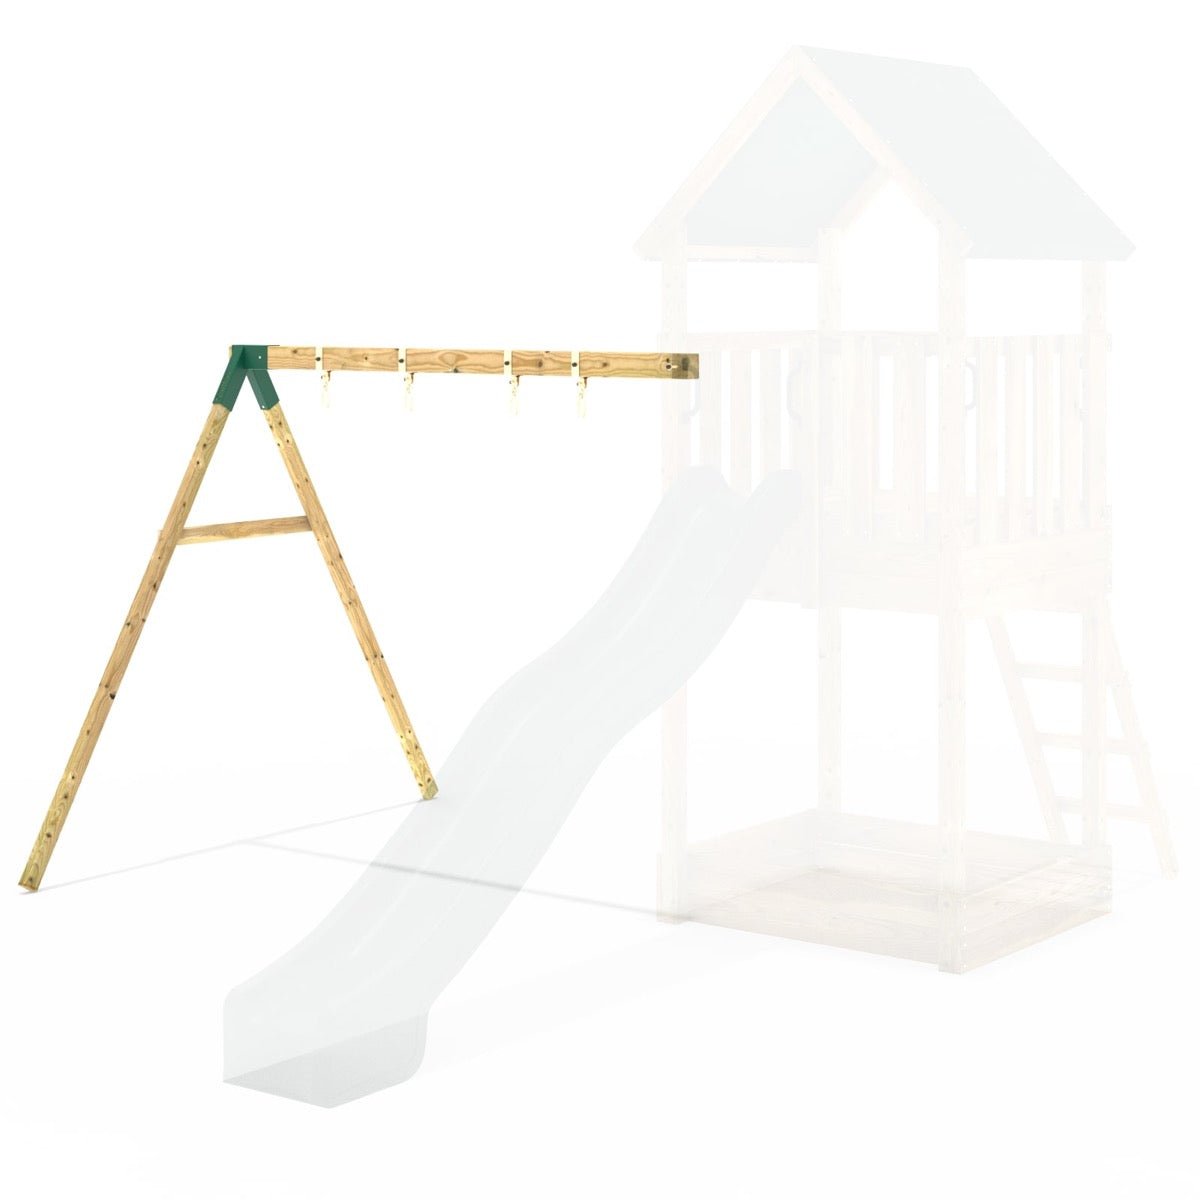 Rebo Double Swing Extension for 2.7m Platform Modular Tower